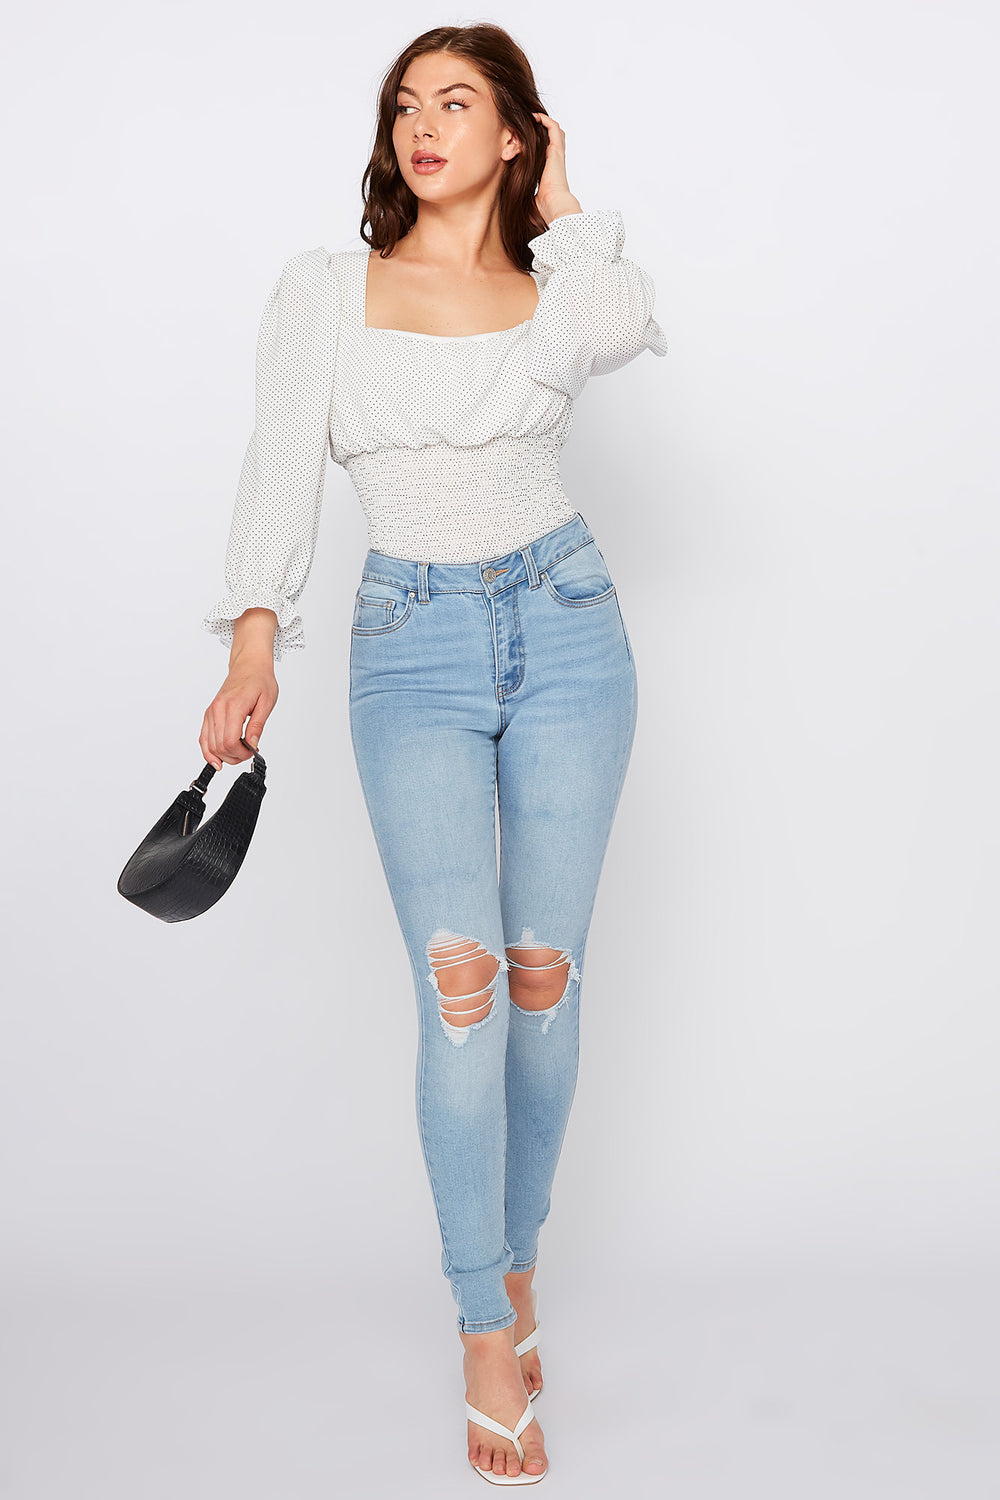 light washed high waisted jeans